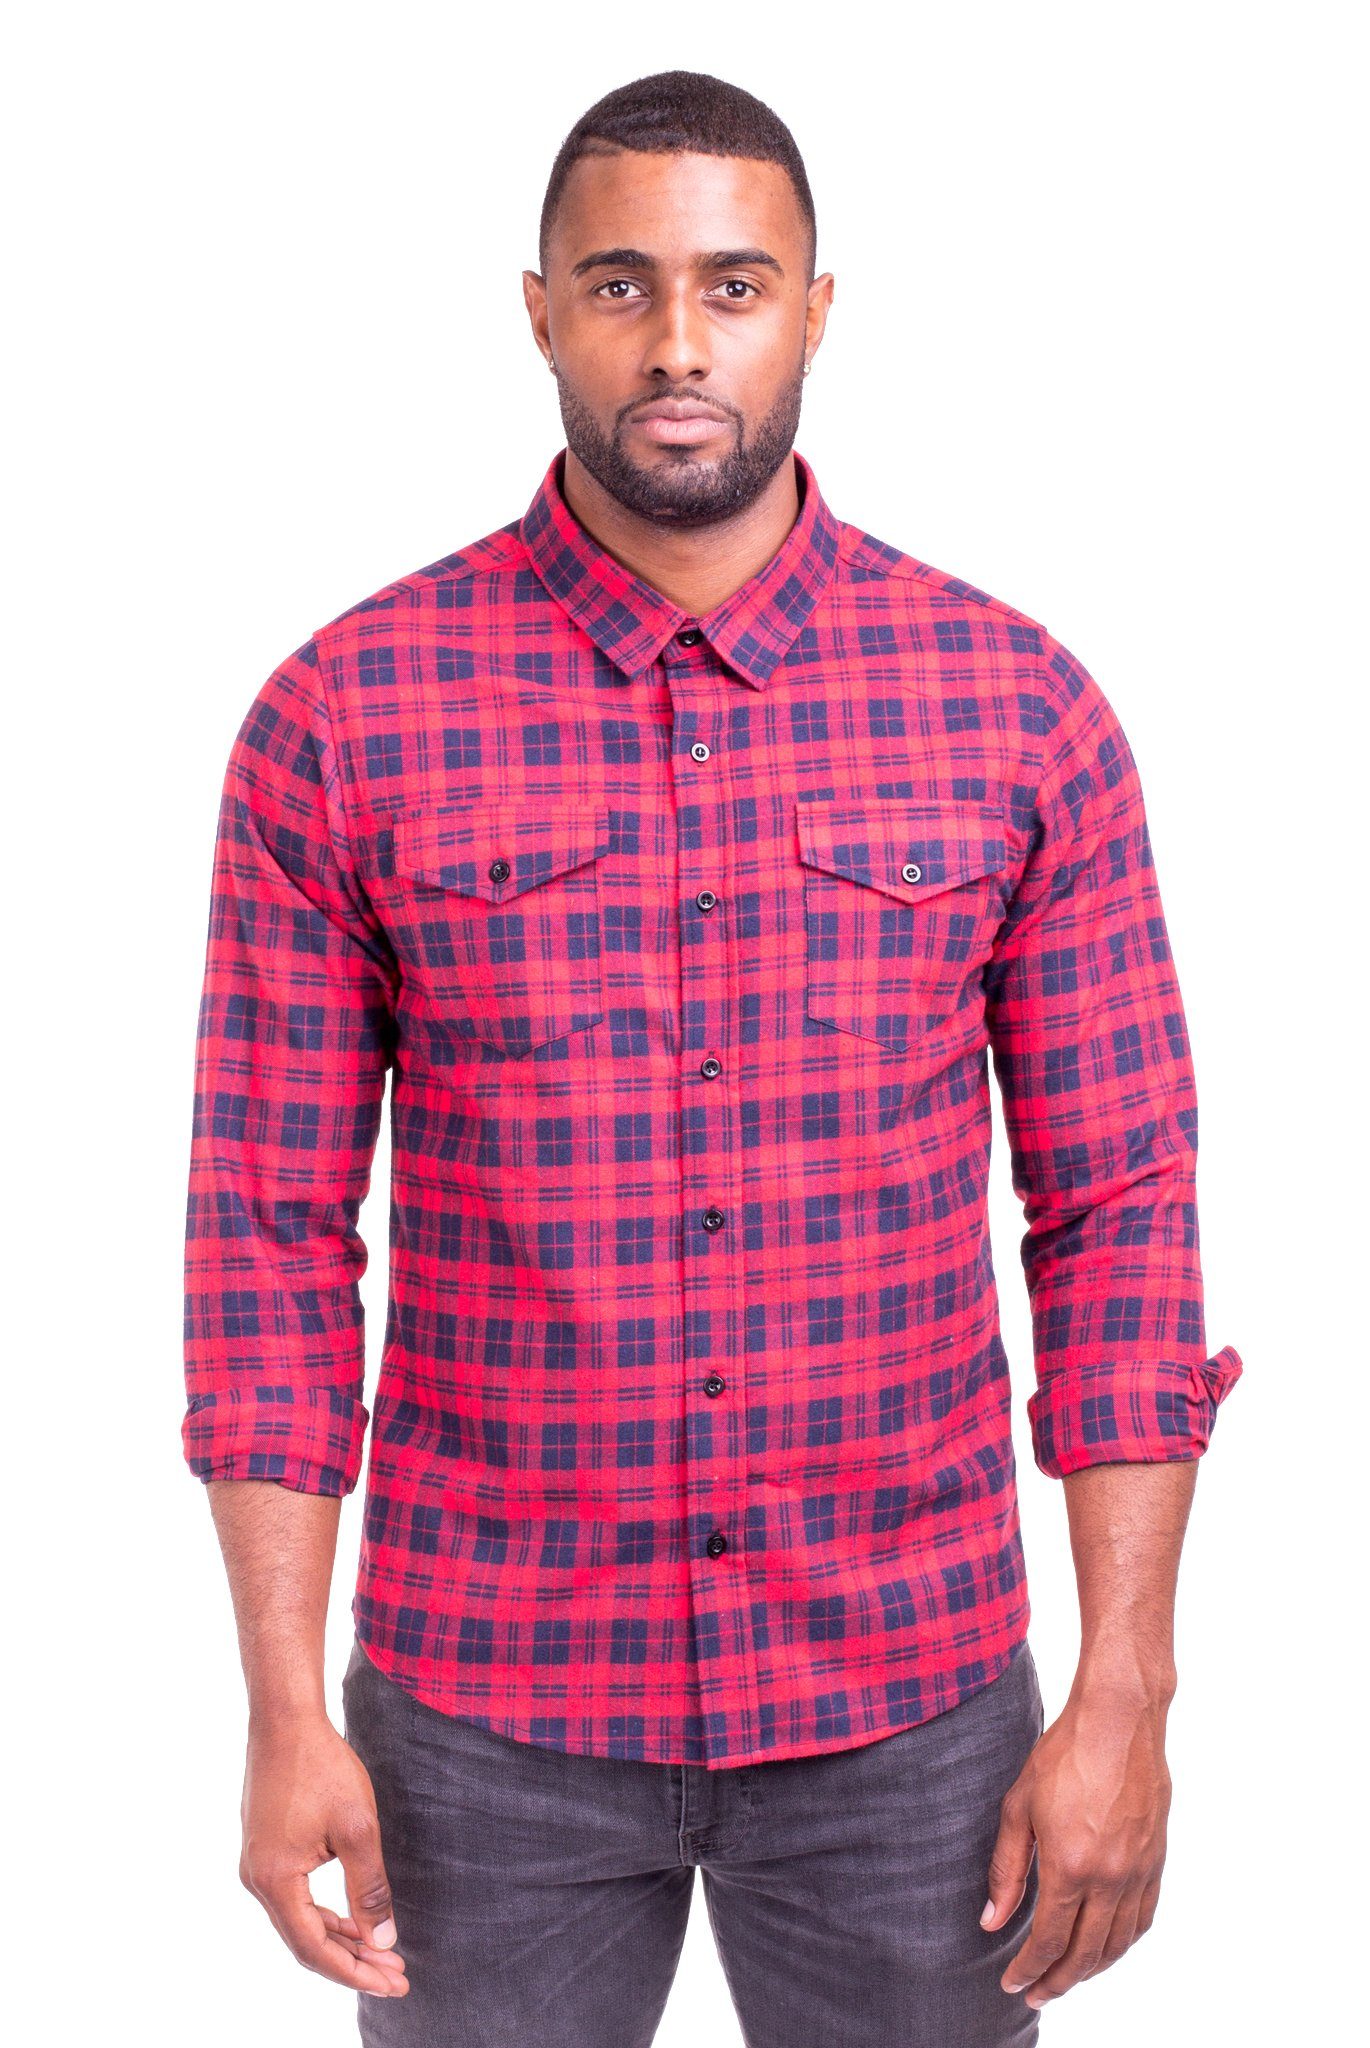 JOHNNY RED/BLUE PLAID FLANNEL SHIRT | Poor Little Rich Boy Clothing